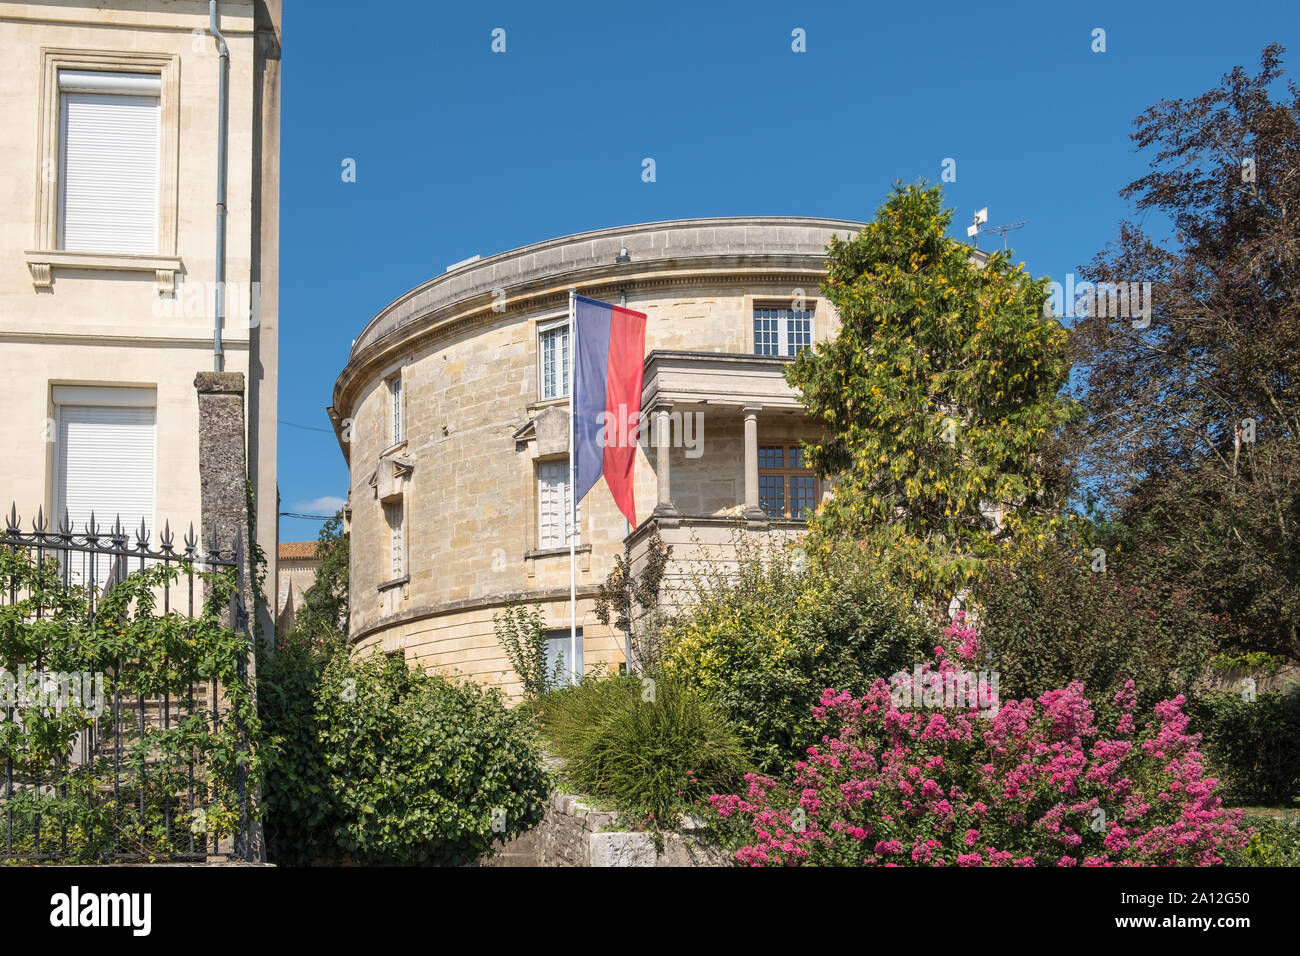 The historic town of Castillon La Bataille in the Gironde Department of Nouvelle-Aquitaine in South Western France Stock Photo